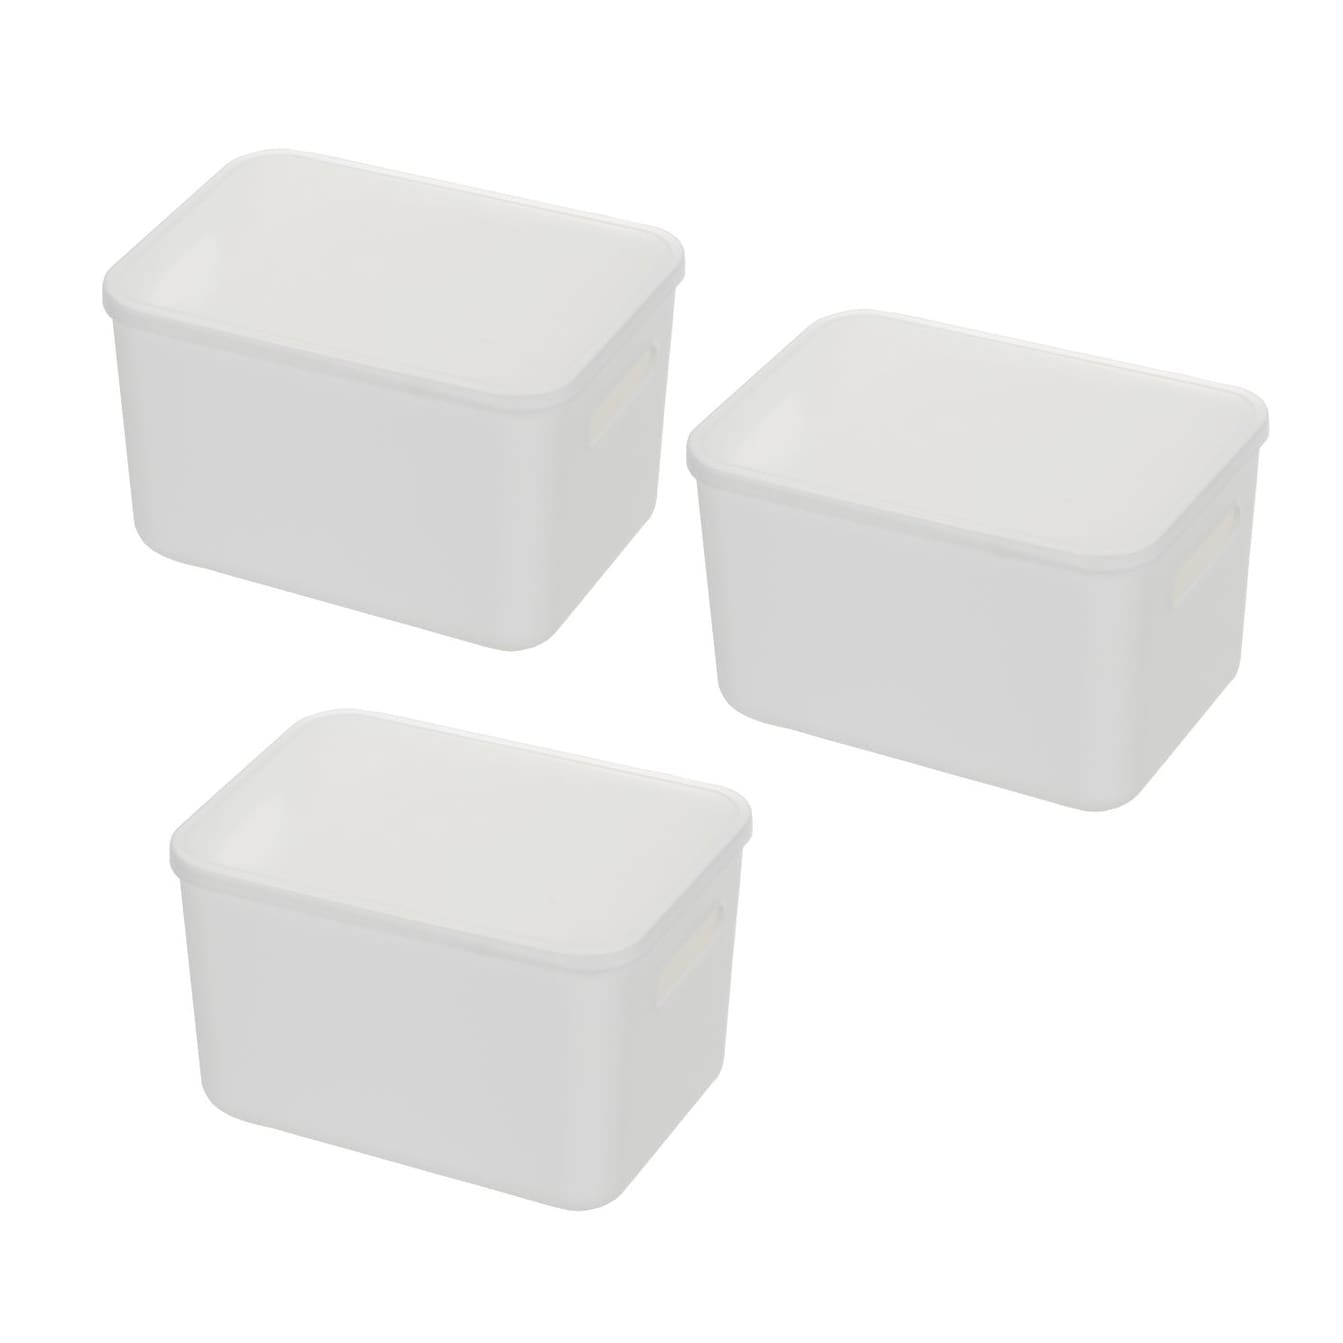  Tuanse 8 Pieces Plastic Storage Bins with Lids White Storage  Box with Handle Stackable Containers with Lids for Organizing White Bins  Small Storage Basket with Lid for Table (7.3 x